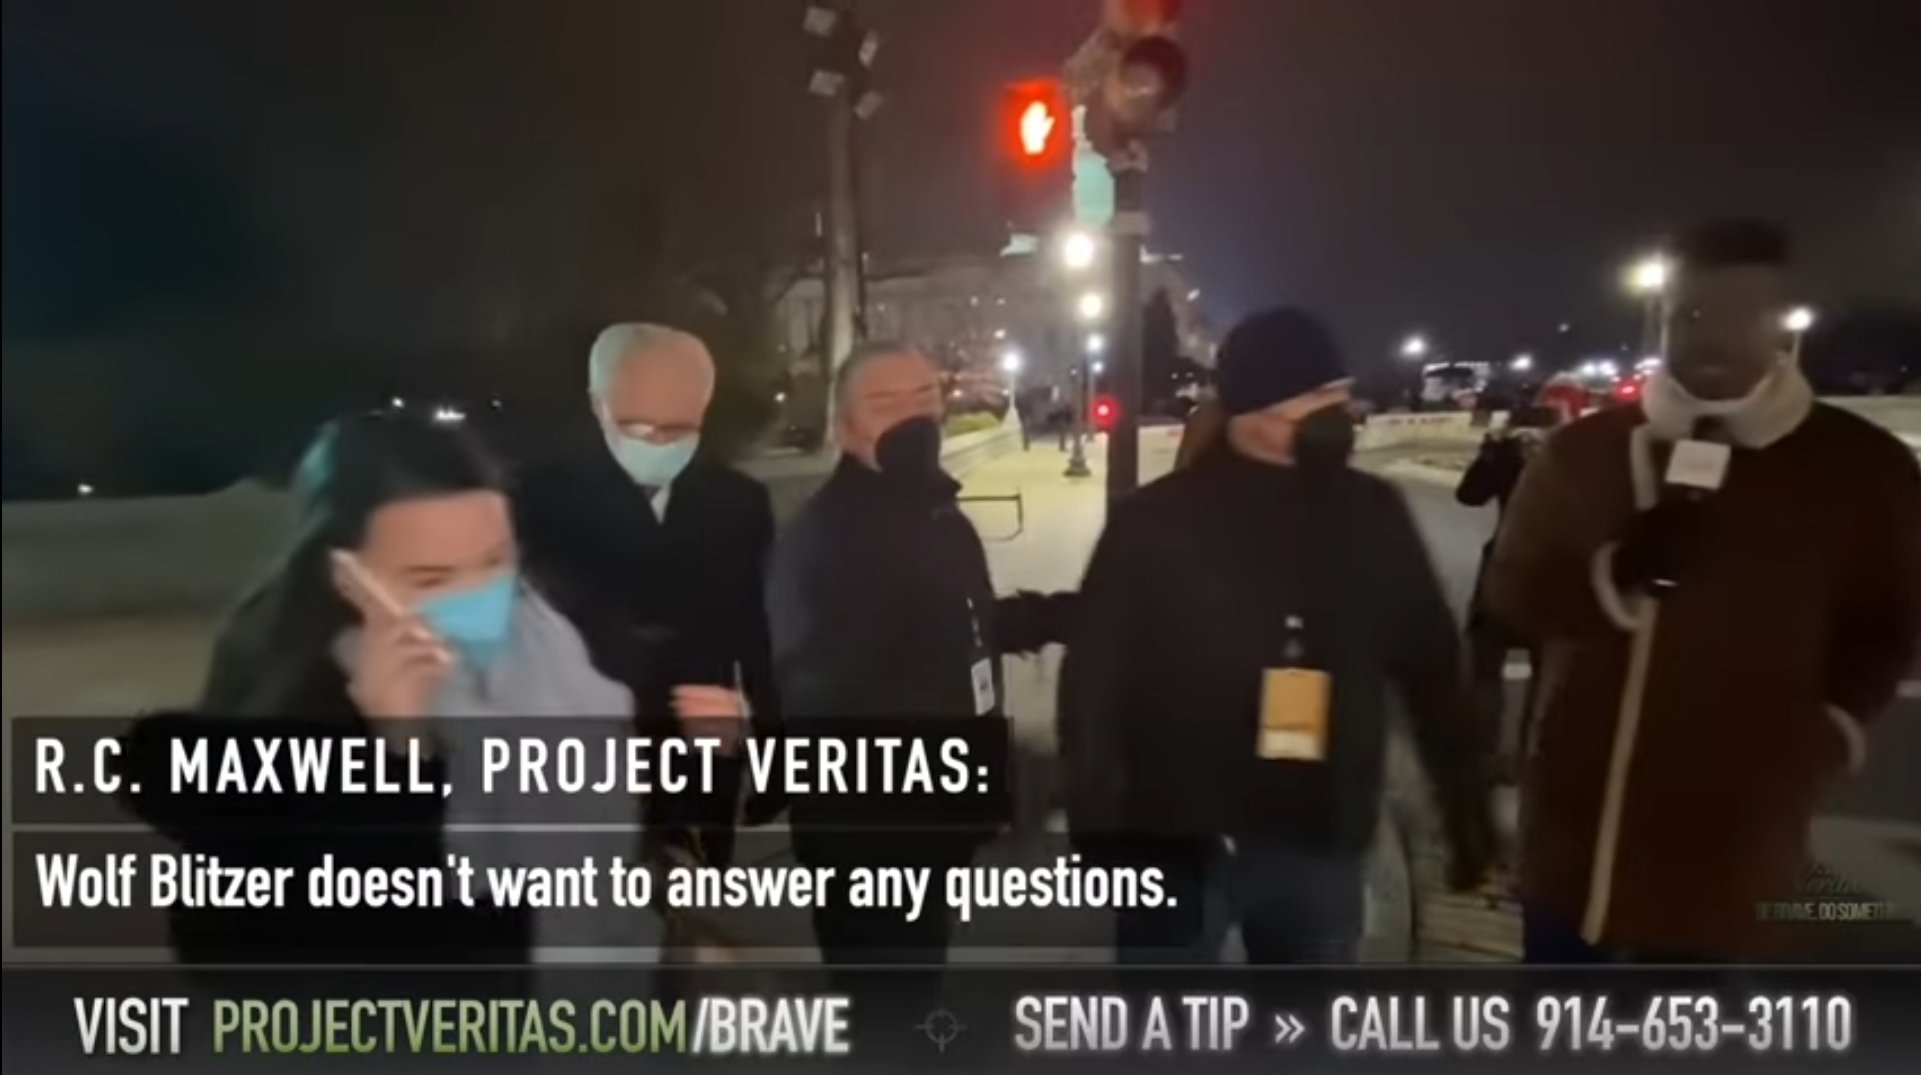 WATCH: CNN Hosts Blitzer, Tapper, and Cooper Run Away When Confronted by Project Veritas Over Producers Accused of Child Sex Crimes (VIDEO)